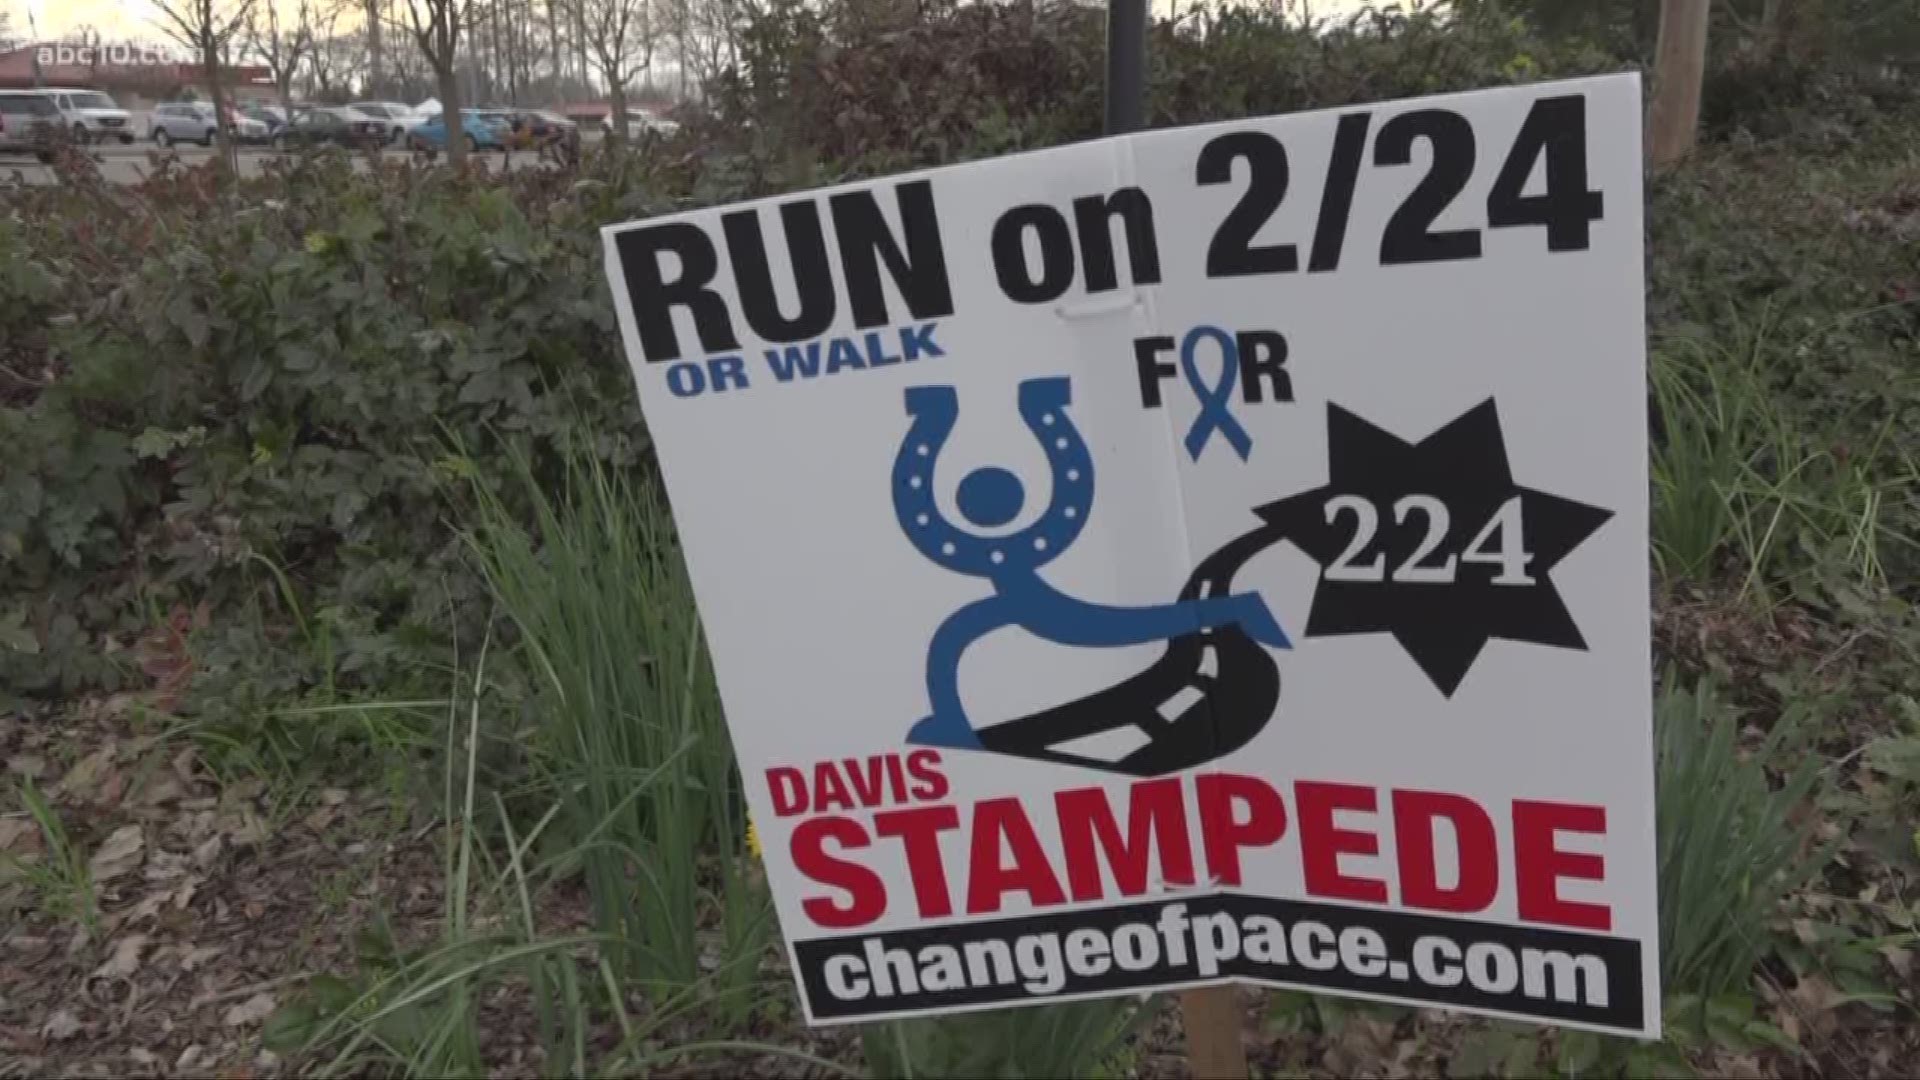 The 37th annual Davis Stampede, a community running and walking event, will pay tribute to a Davis Police Officer who was killed in the line of duty in early January.